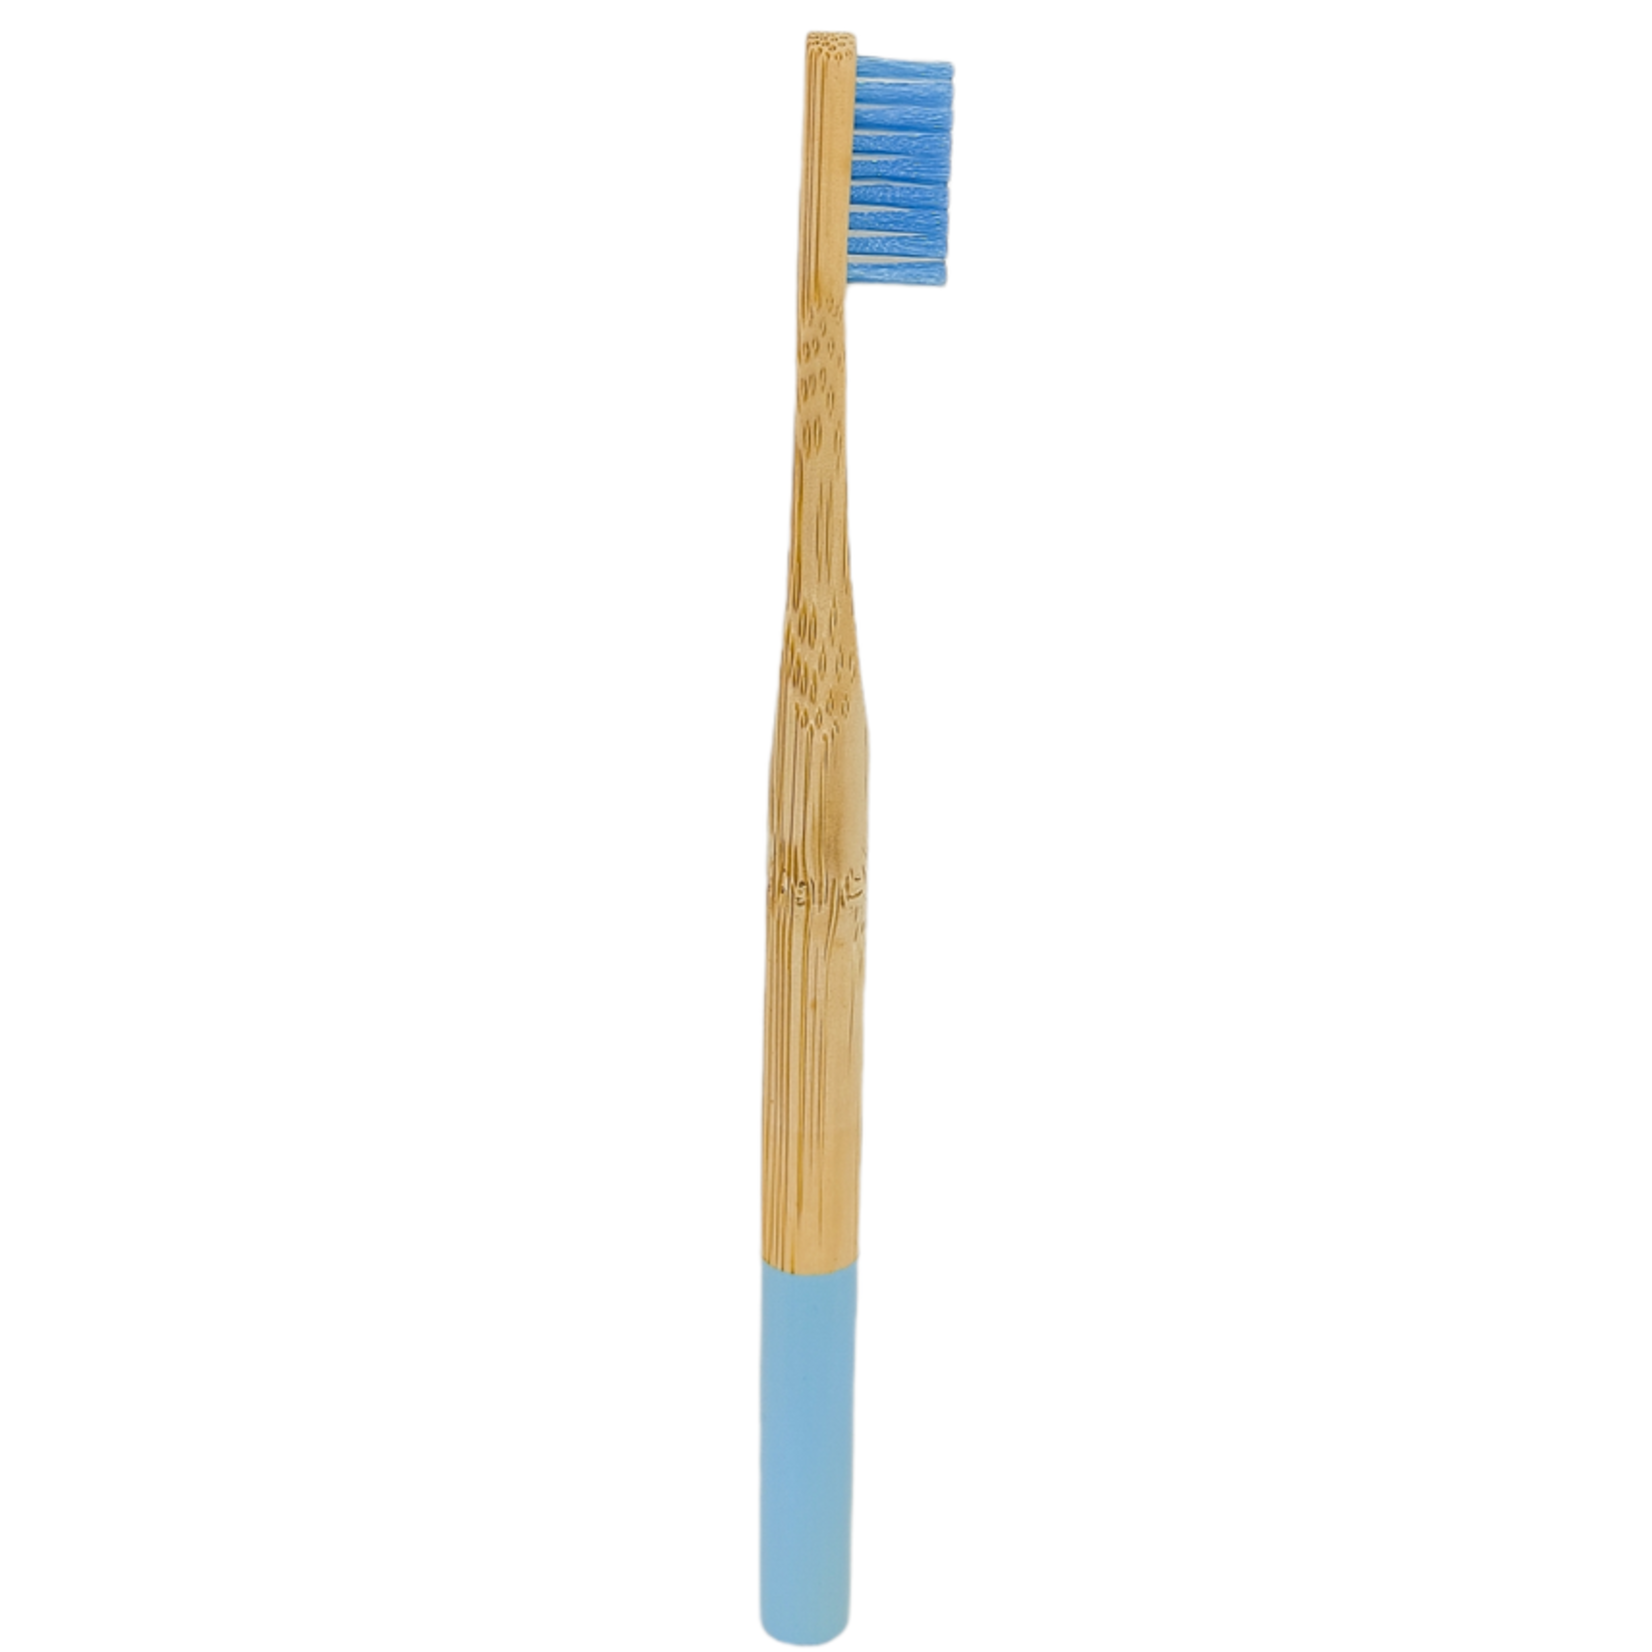 Daikys Bamboo Kid Toothbrushes l Colored & Eco-friendly